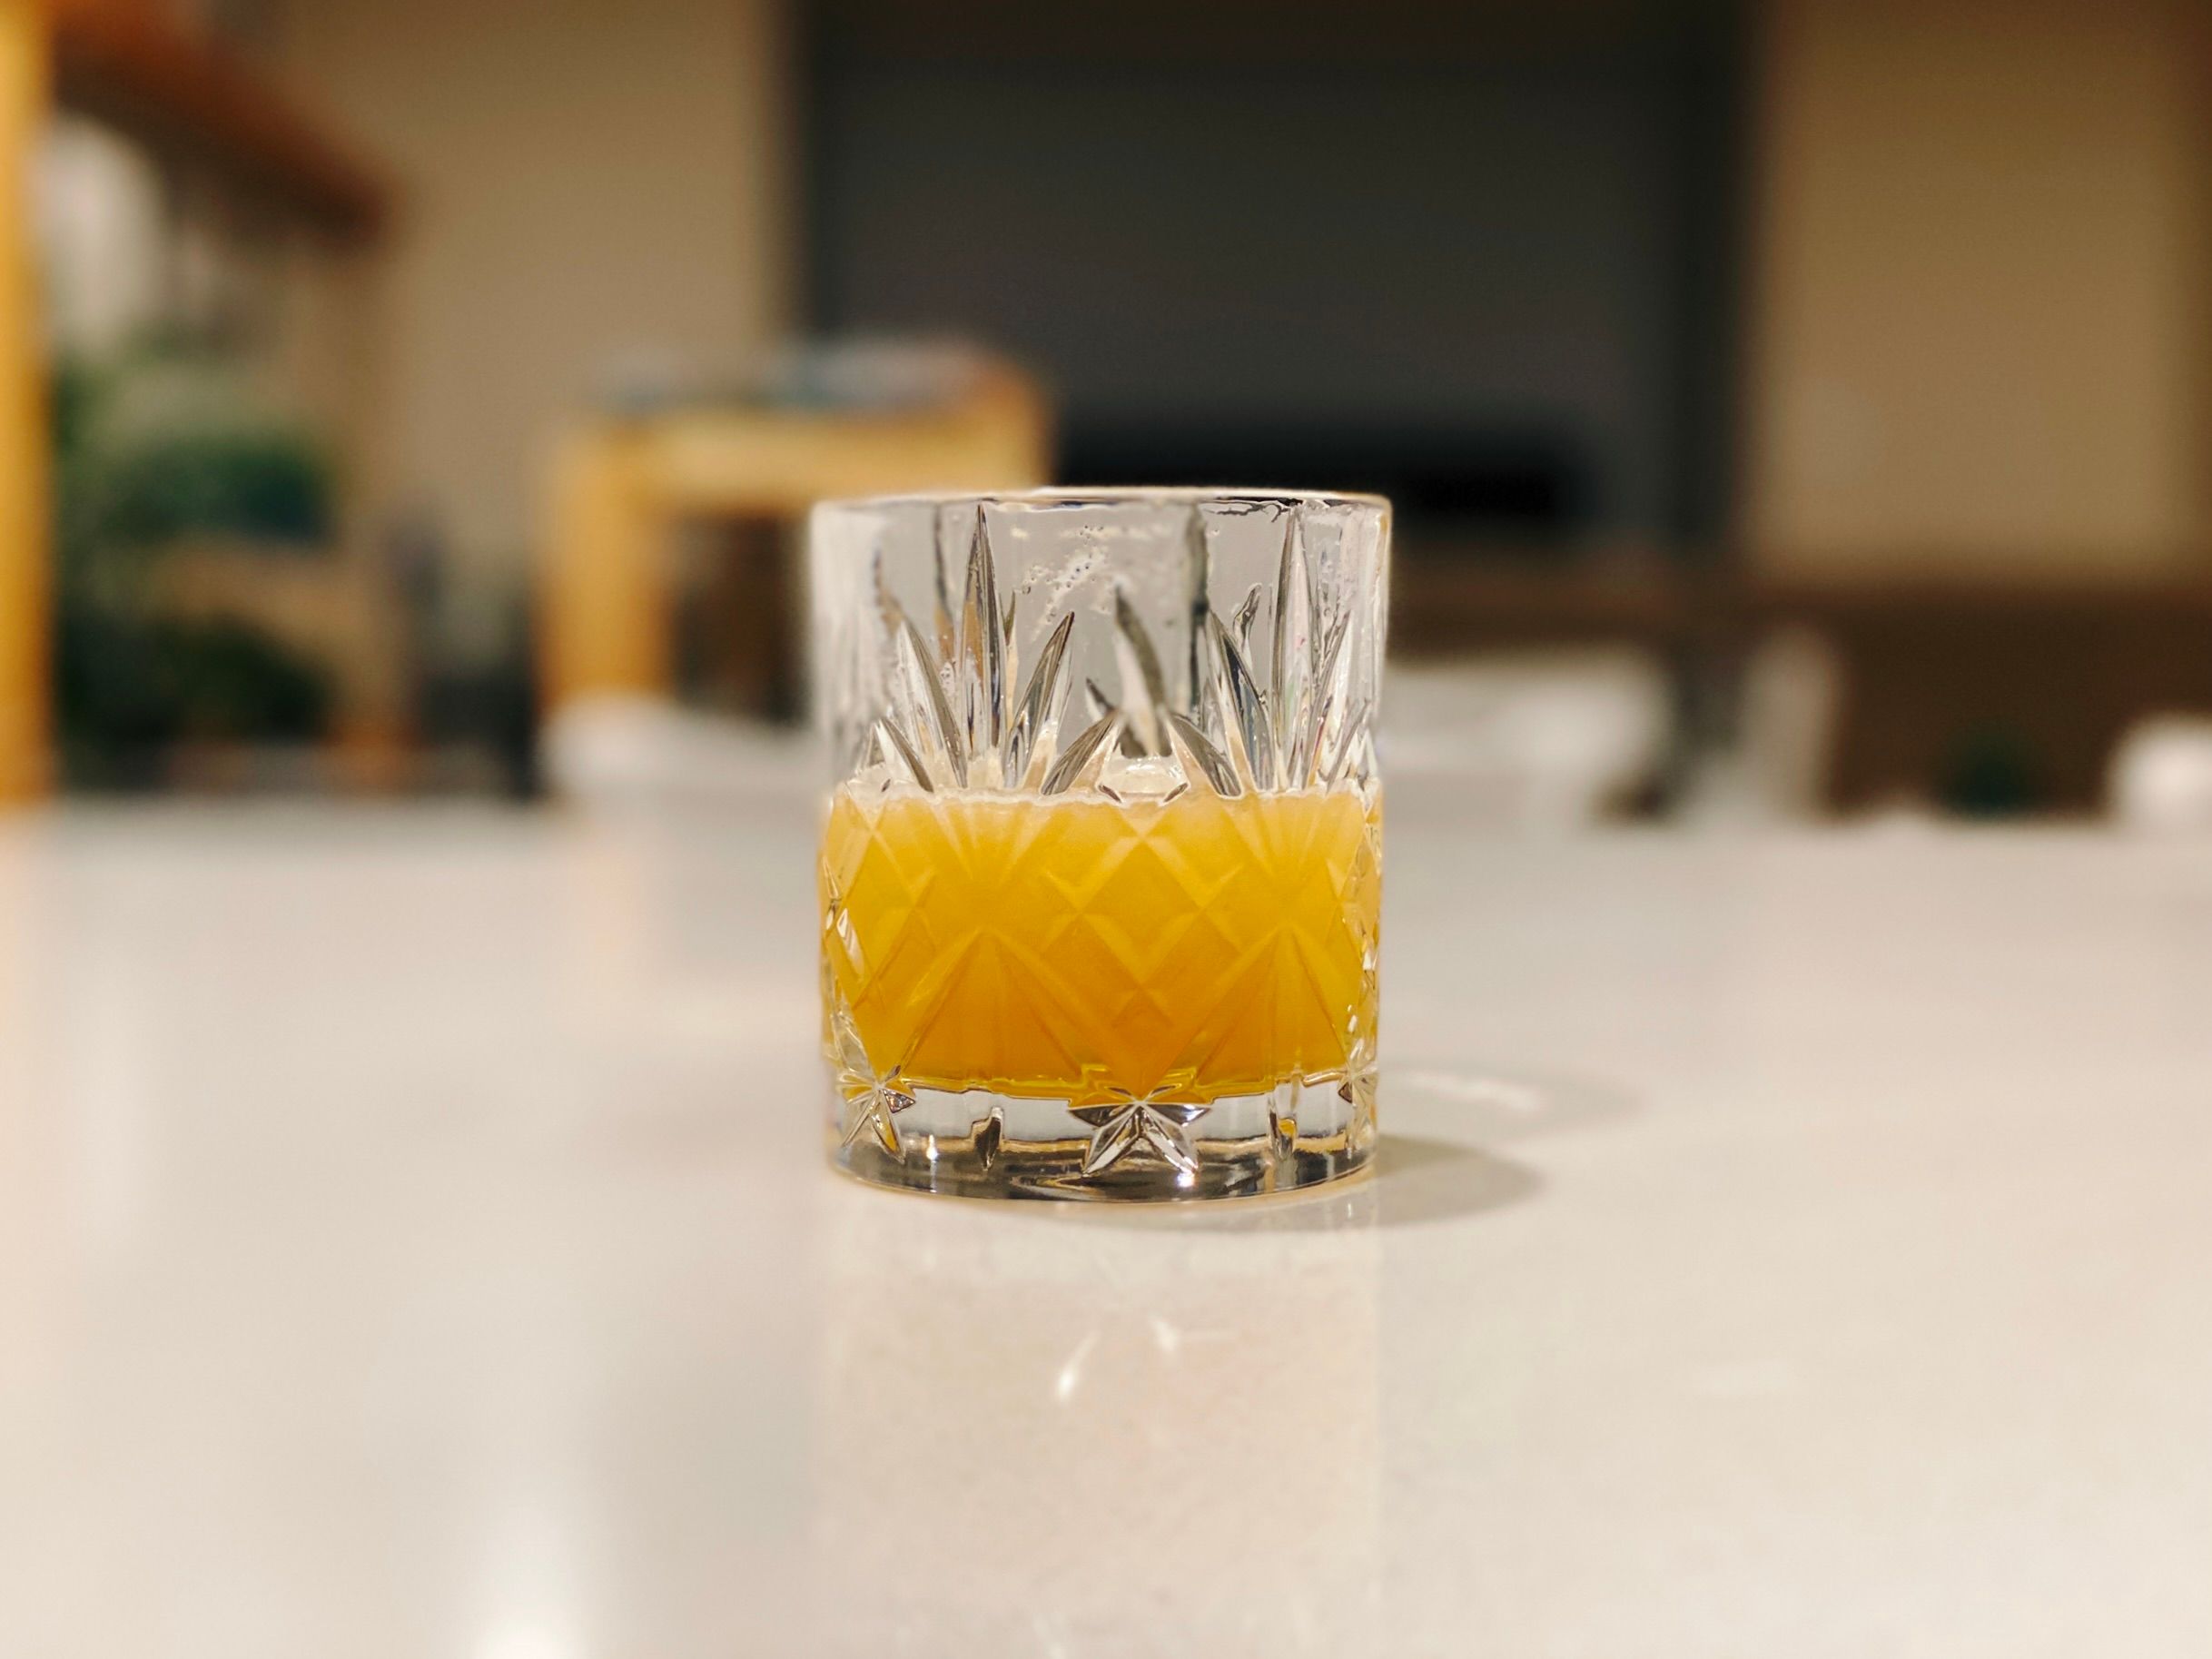 A photo of a golden-looking drink in a fancy whisky glass.